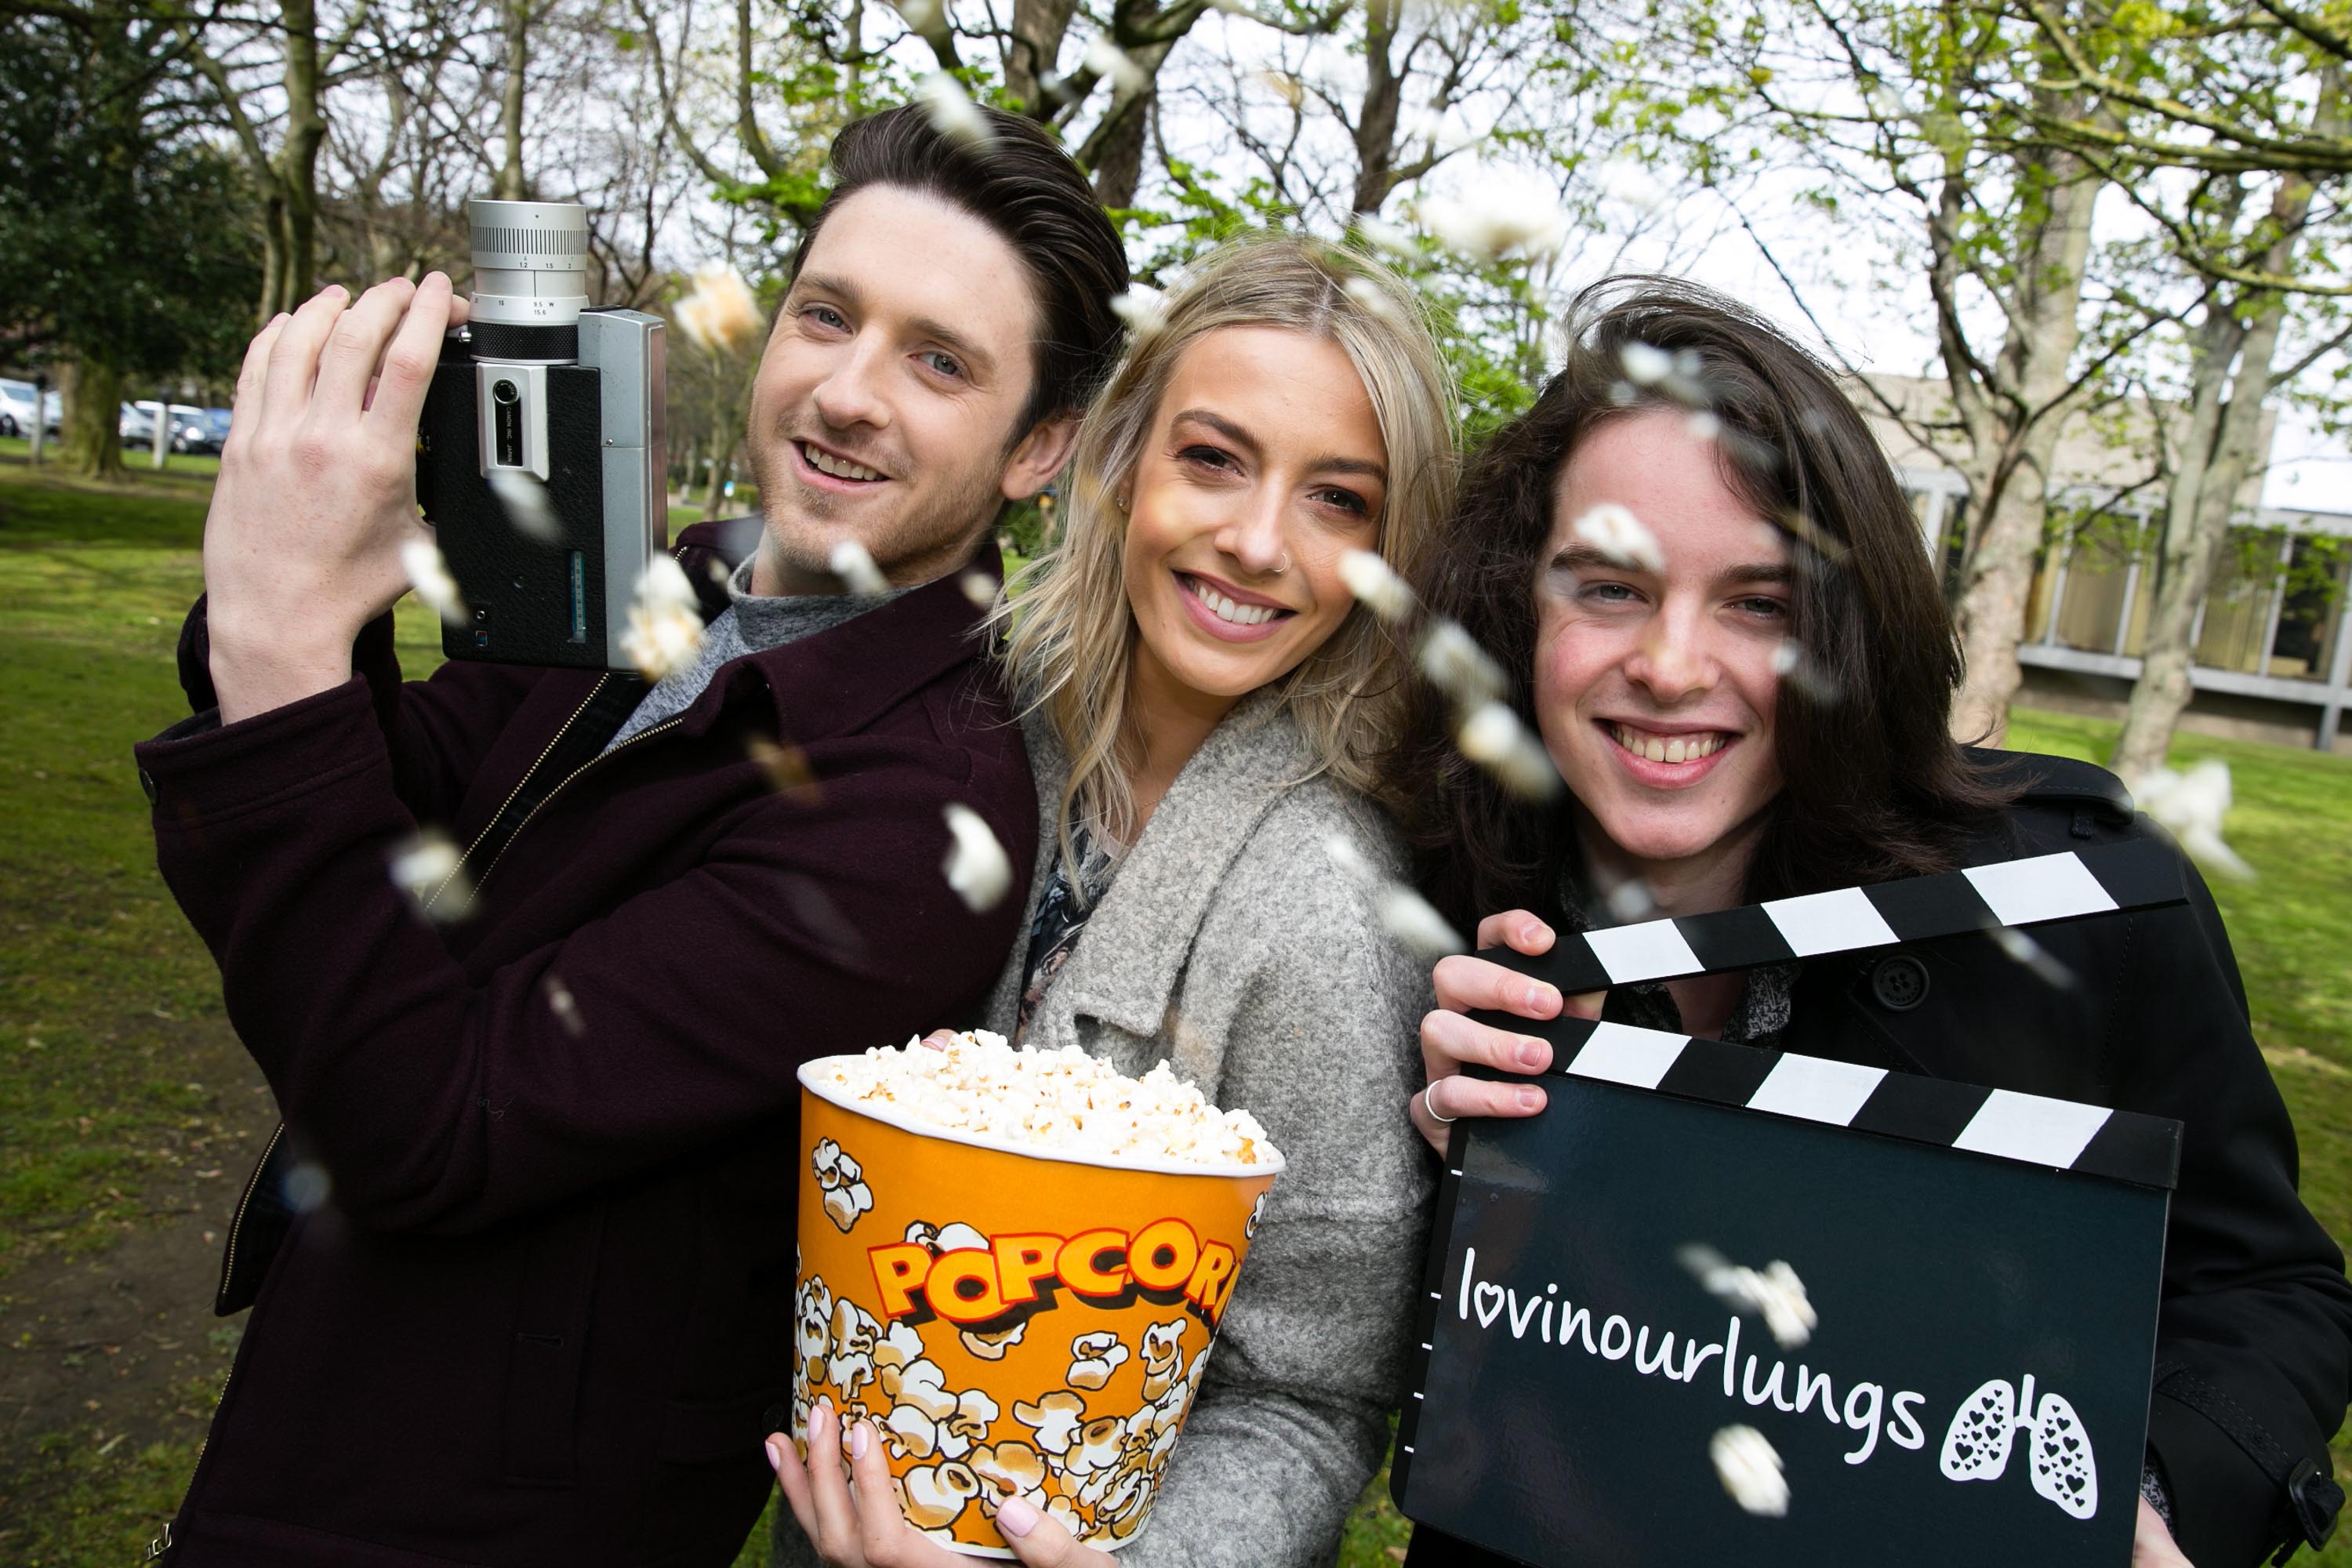 NO FEE FOR REPRO Stephen Byrne, RTÉ Two's Two Tube, Bláthnaid Treacy, RTÉ Two's Two Tube and Ferdia Walsh-Peelo, Sing Street star pictured at the launch of the Lovin' our Lungs Movie competition by the Irish Lung Health Alliance, a coalition of 17 charities, in partnership with Foróige, the national youth development organisation. The competition, which is supported by GSK, was launched against a backdrop of lung disease being the most common health condition in young adults aged 18 to 24 years. The aim is to highlight among teenagers the importance of lung health for a full and active life. The competition is open to teenagers between 12 and 18 years, with the winning entry being televised on RTÉ Two's Two Tube and scooping a thrilling adventure experience. The closing date is Sunday May 22 2016 and full details can be found at www.lovinourlungs.ie Pic Shane O'Neill Photography